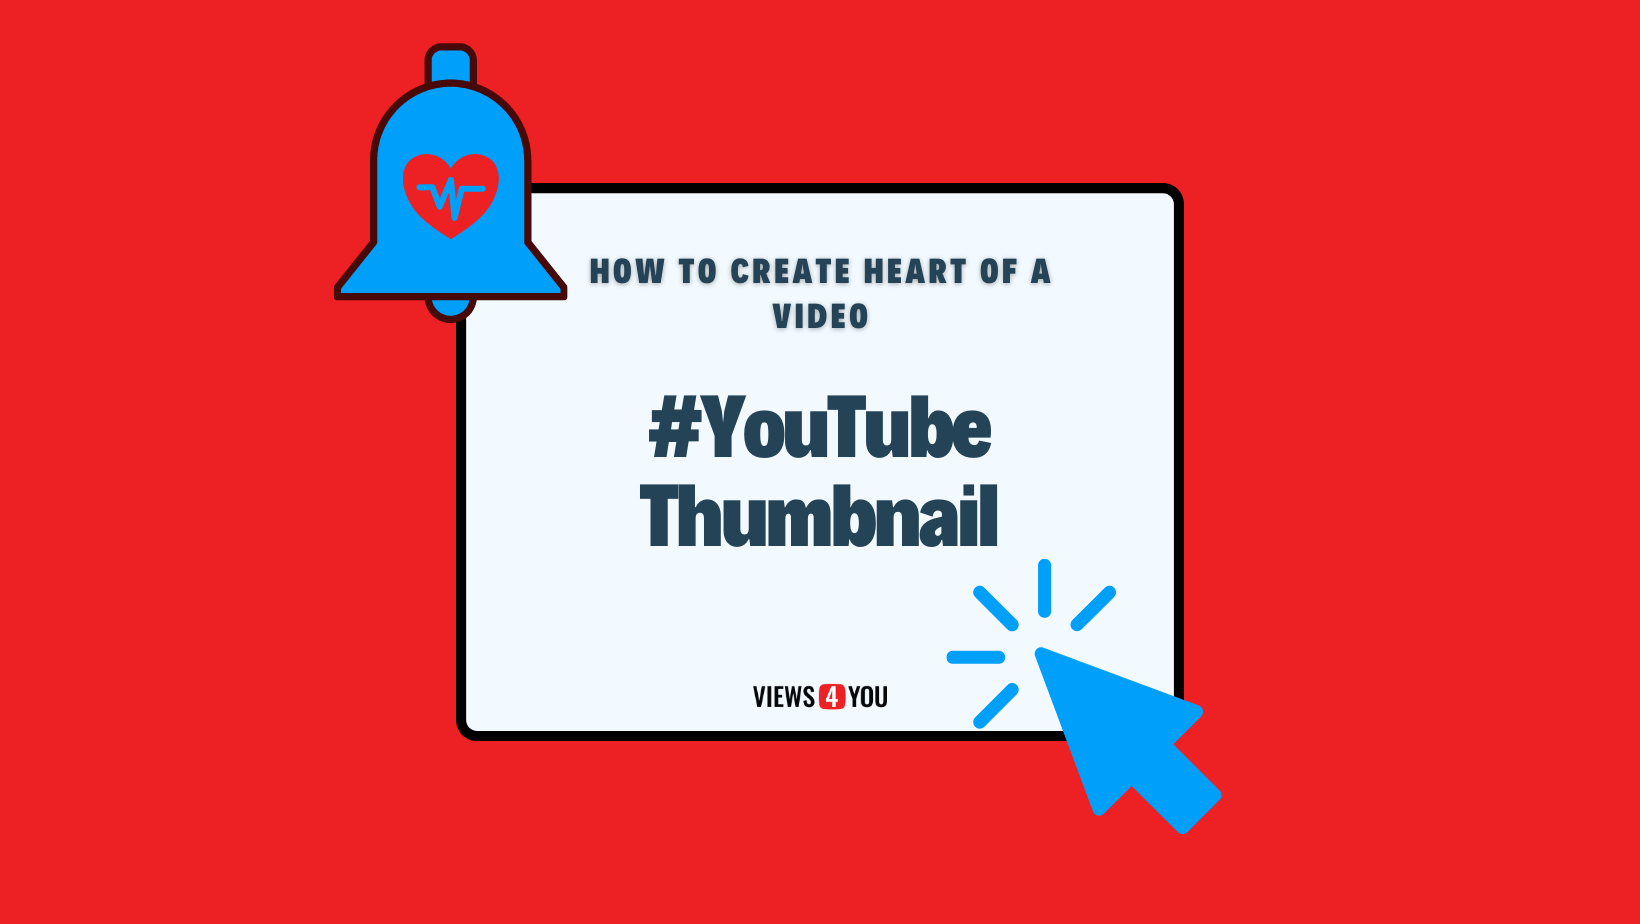 All YouTube Thumbnails Secrets: How to Create the Heart of a Video